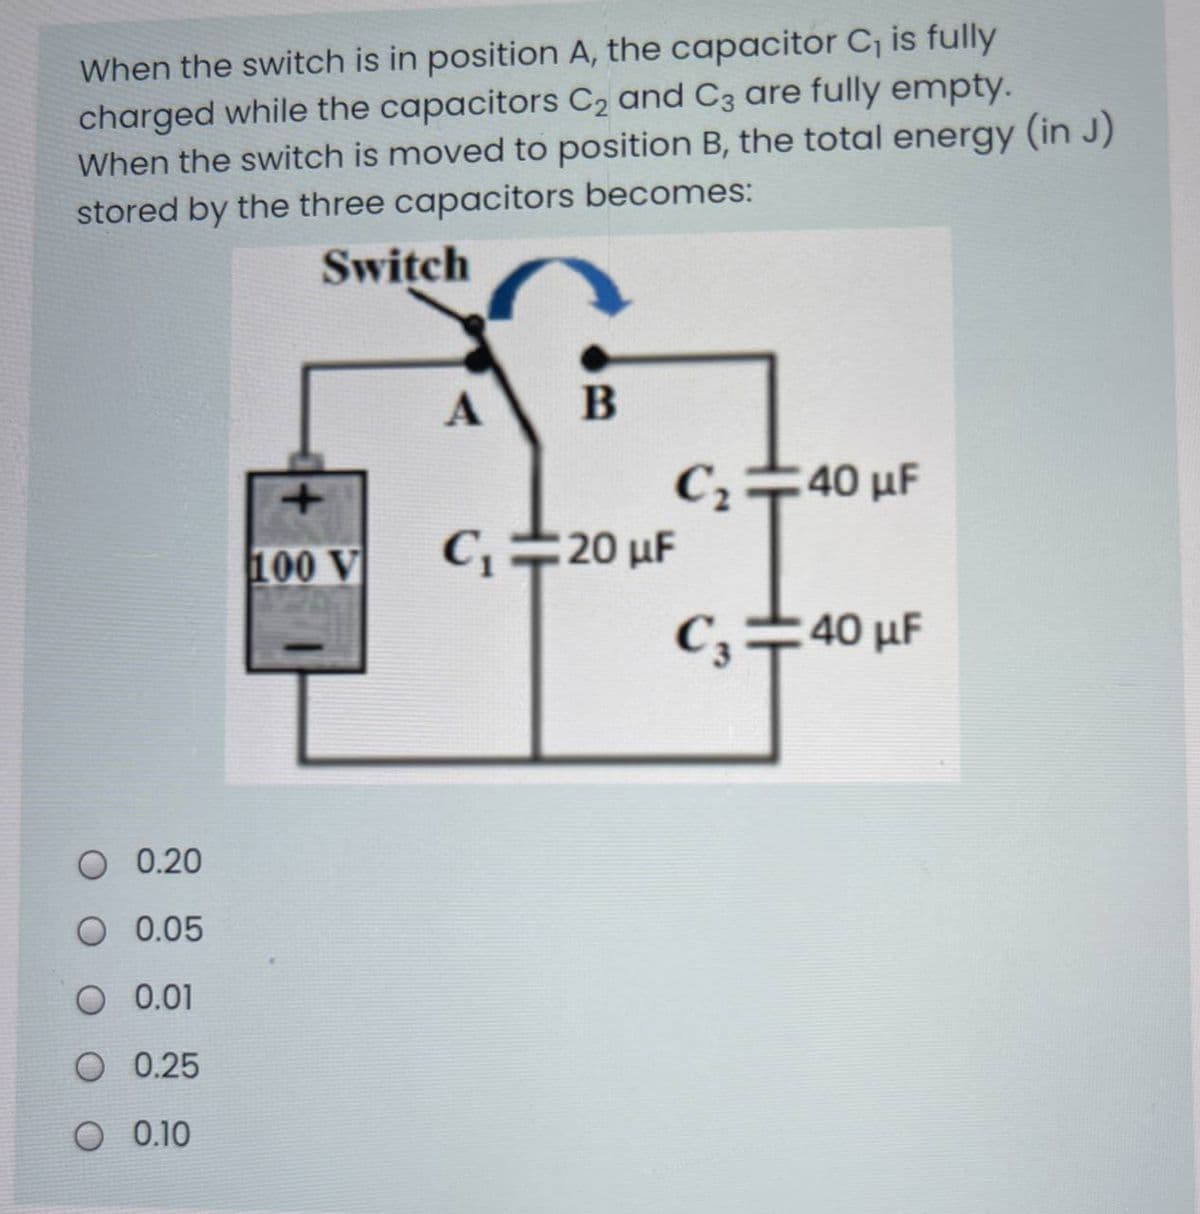 When the switch is in position A, the capacitor C, is fully
charged while the capacitors C2 and C3 are fully empty.
When the switch is moved to position B, the total energy (in J)
stored by the three capacitors becomes:
Switch
A
C÷40 µF
100 V
C20 uF
C,
40 μF
0.20
O 0.05
O 0.01
O 0.25
O 0.10
